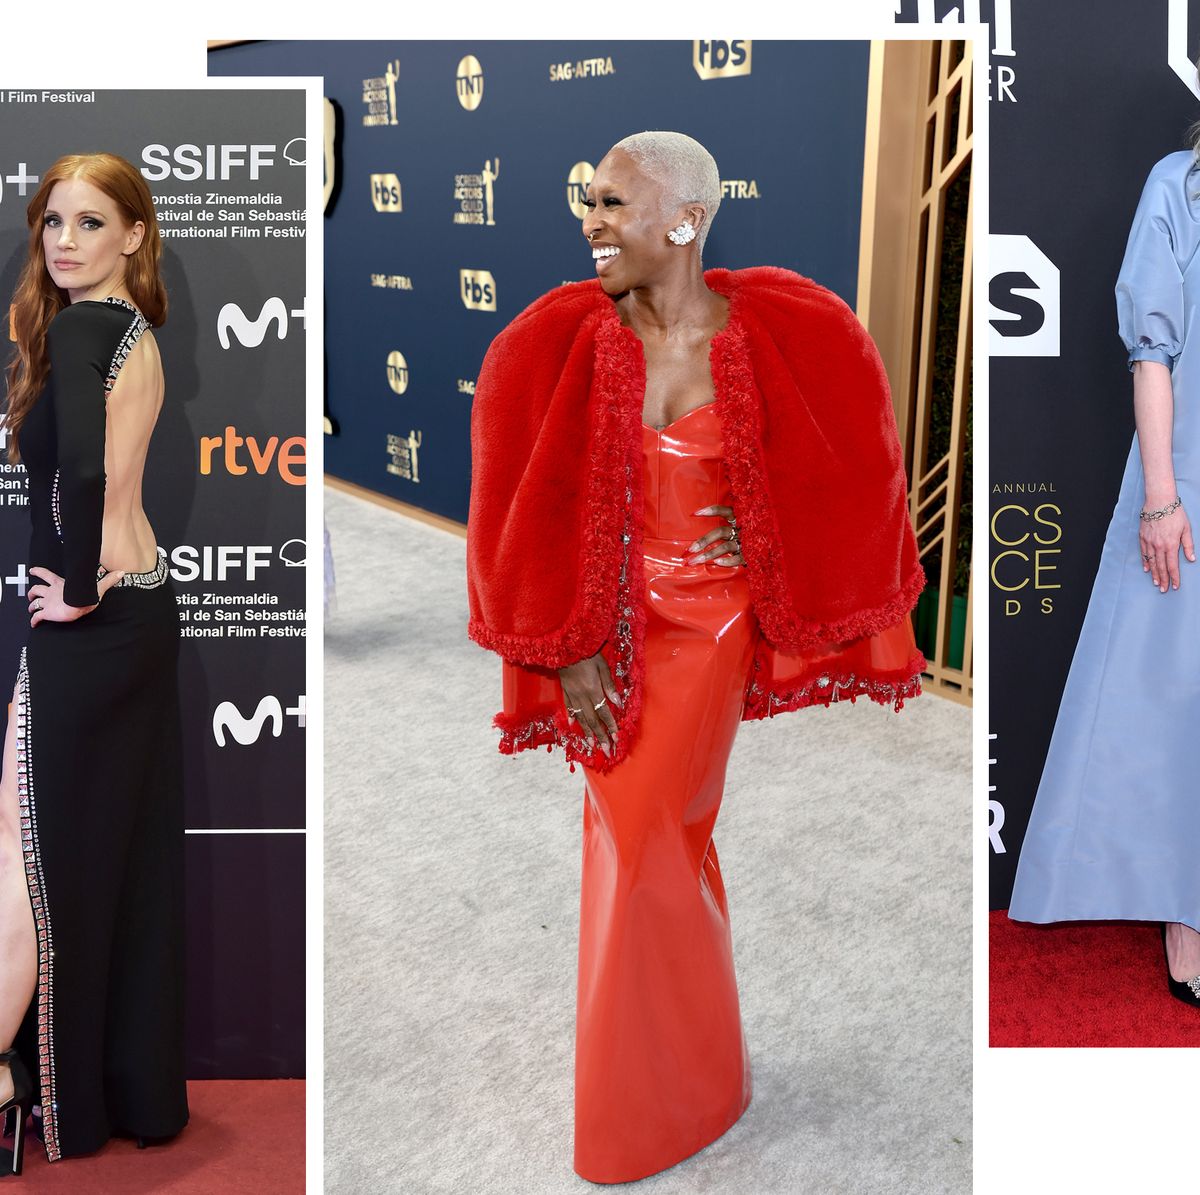 Every Wedding-Worthy Look From the 2022 Oscars Red Carpet